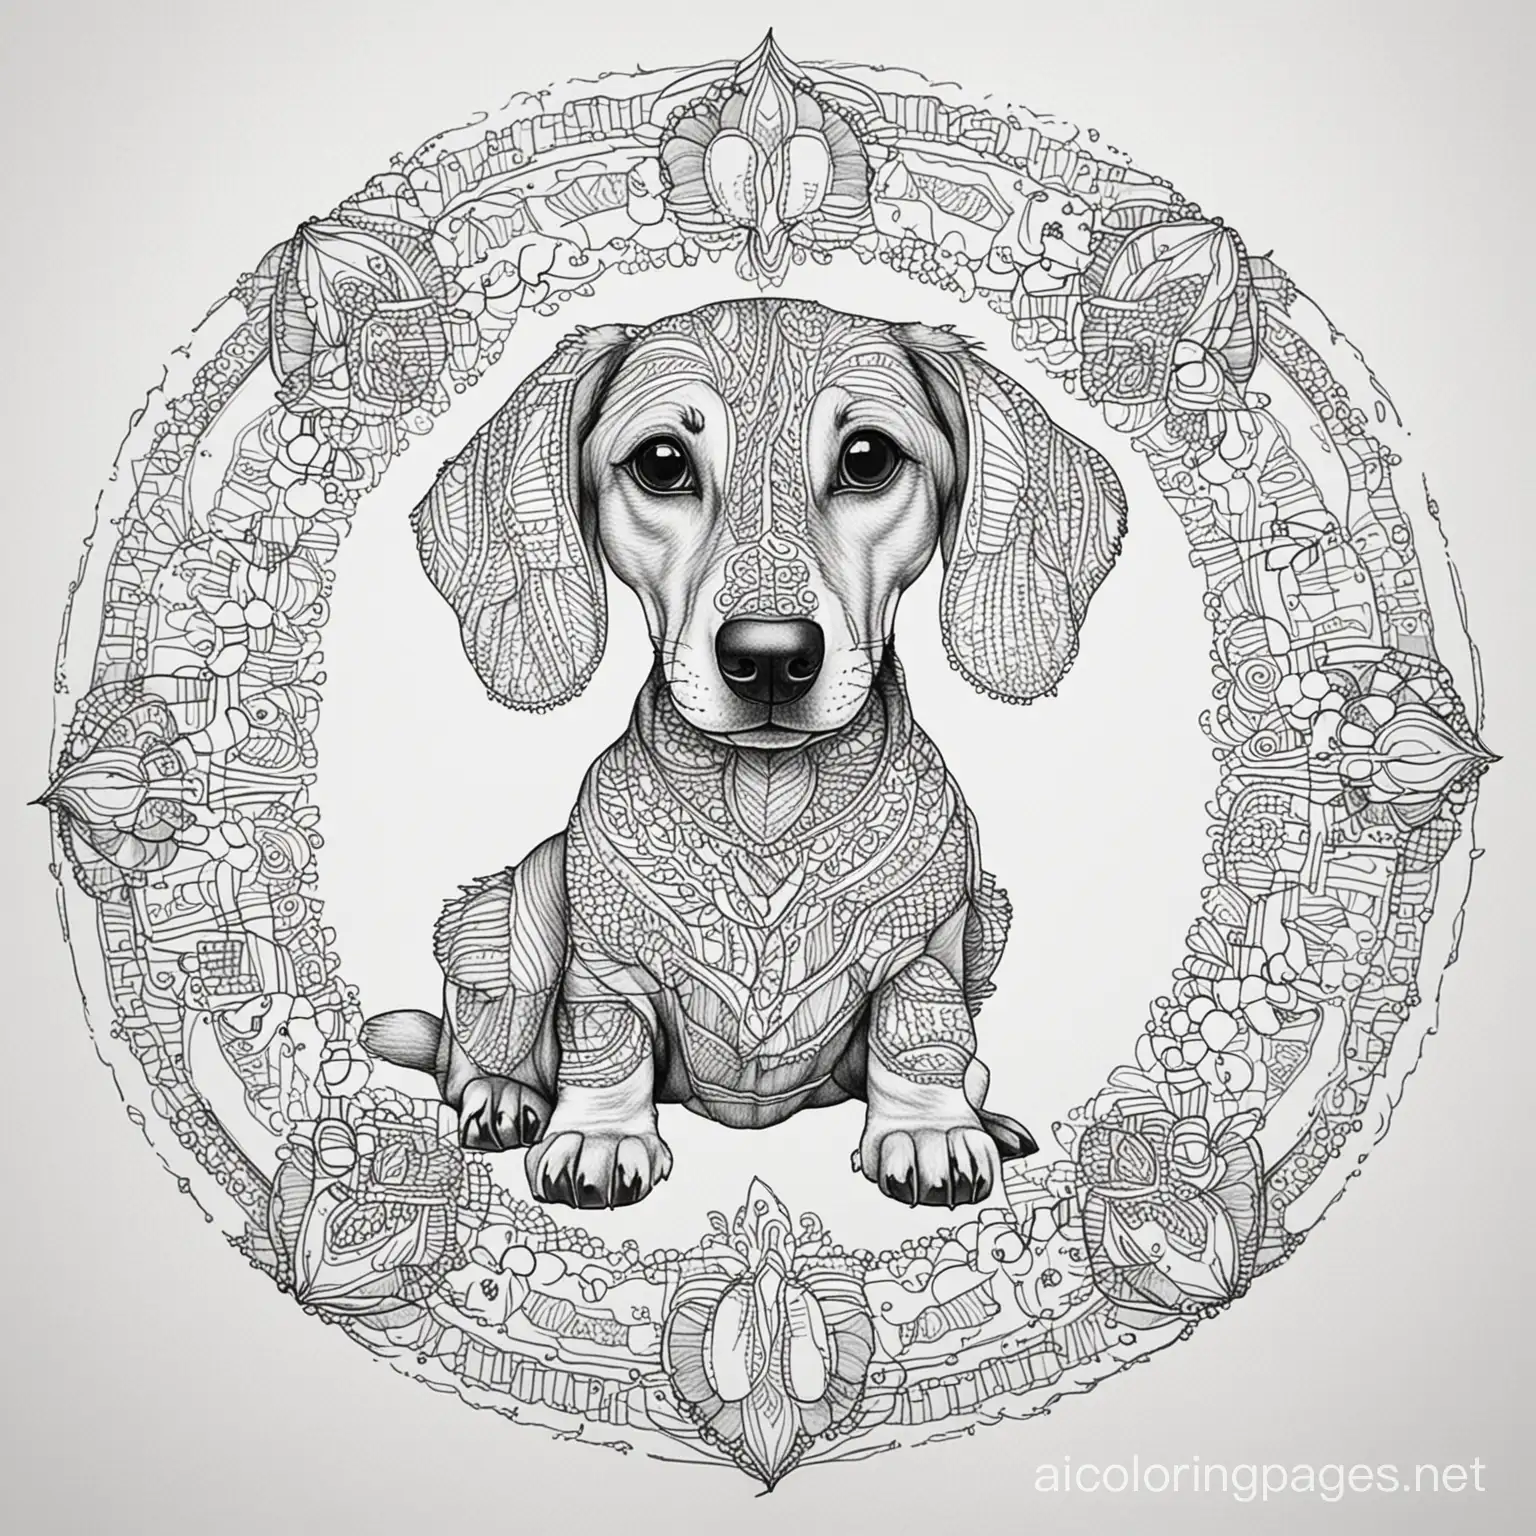 Dachshund-Dog-Mandala-Coloring-Page-Black-and-White-Line-Art-for-Simplicity-and-Creativity